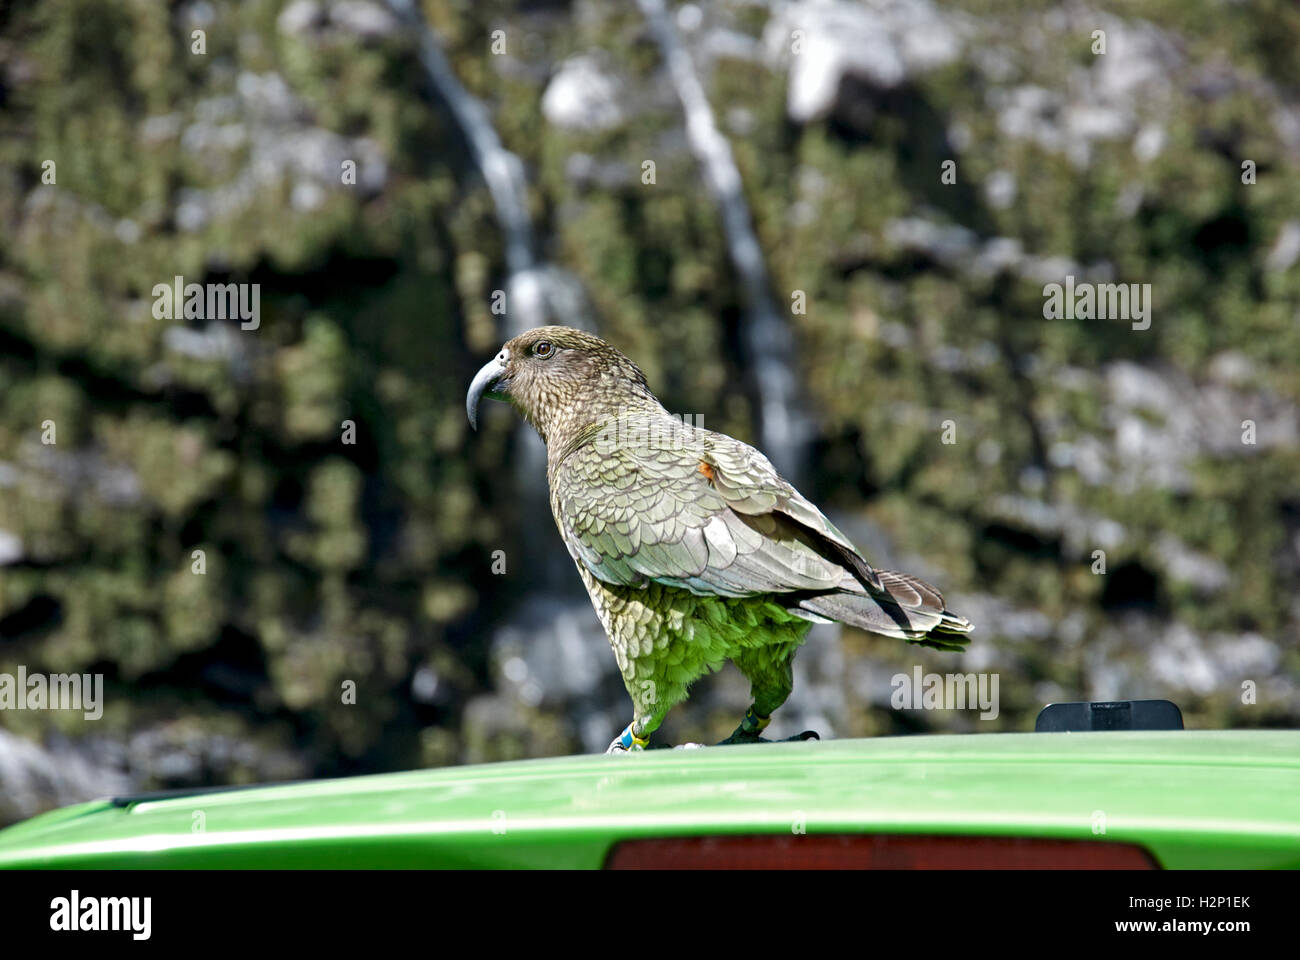 A kea bird stands on a tourist's car at Arthur's Pass, near Milford Sound in New Zealand. Stock Photo